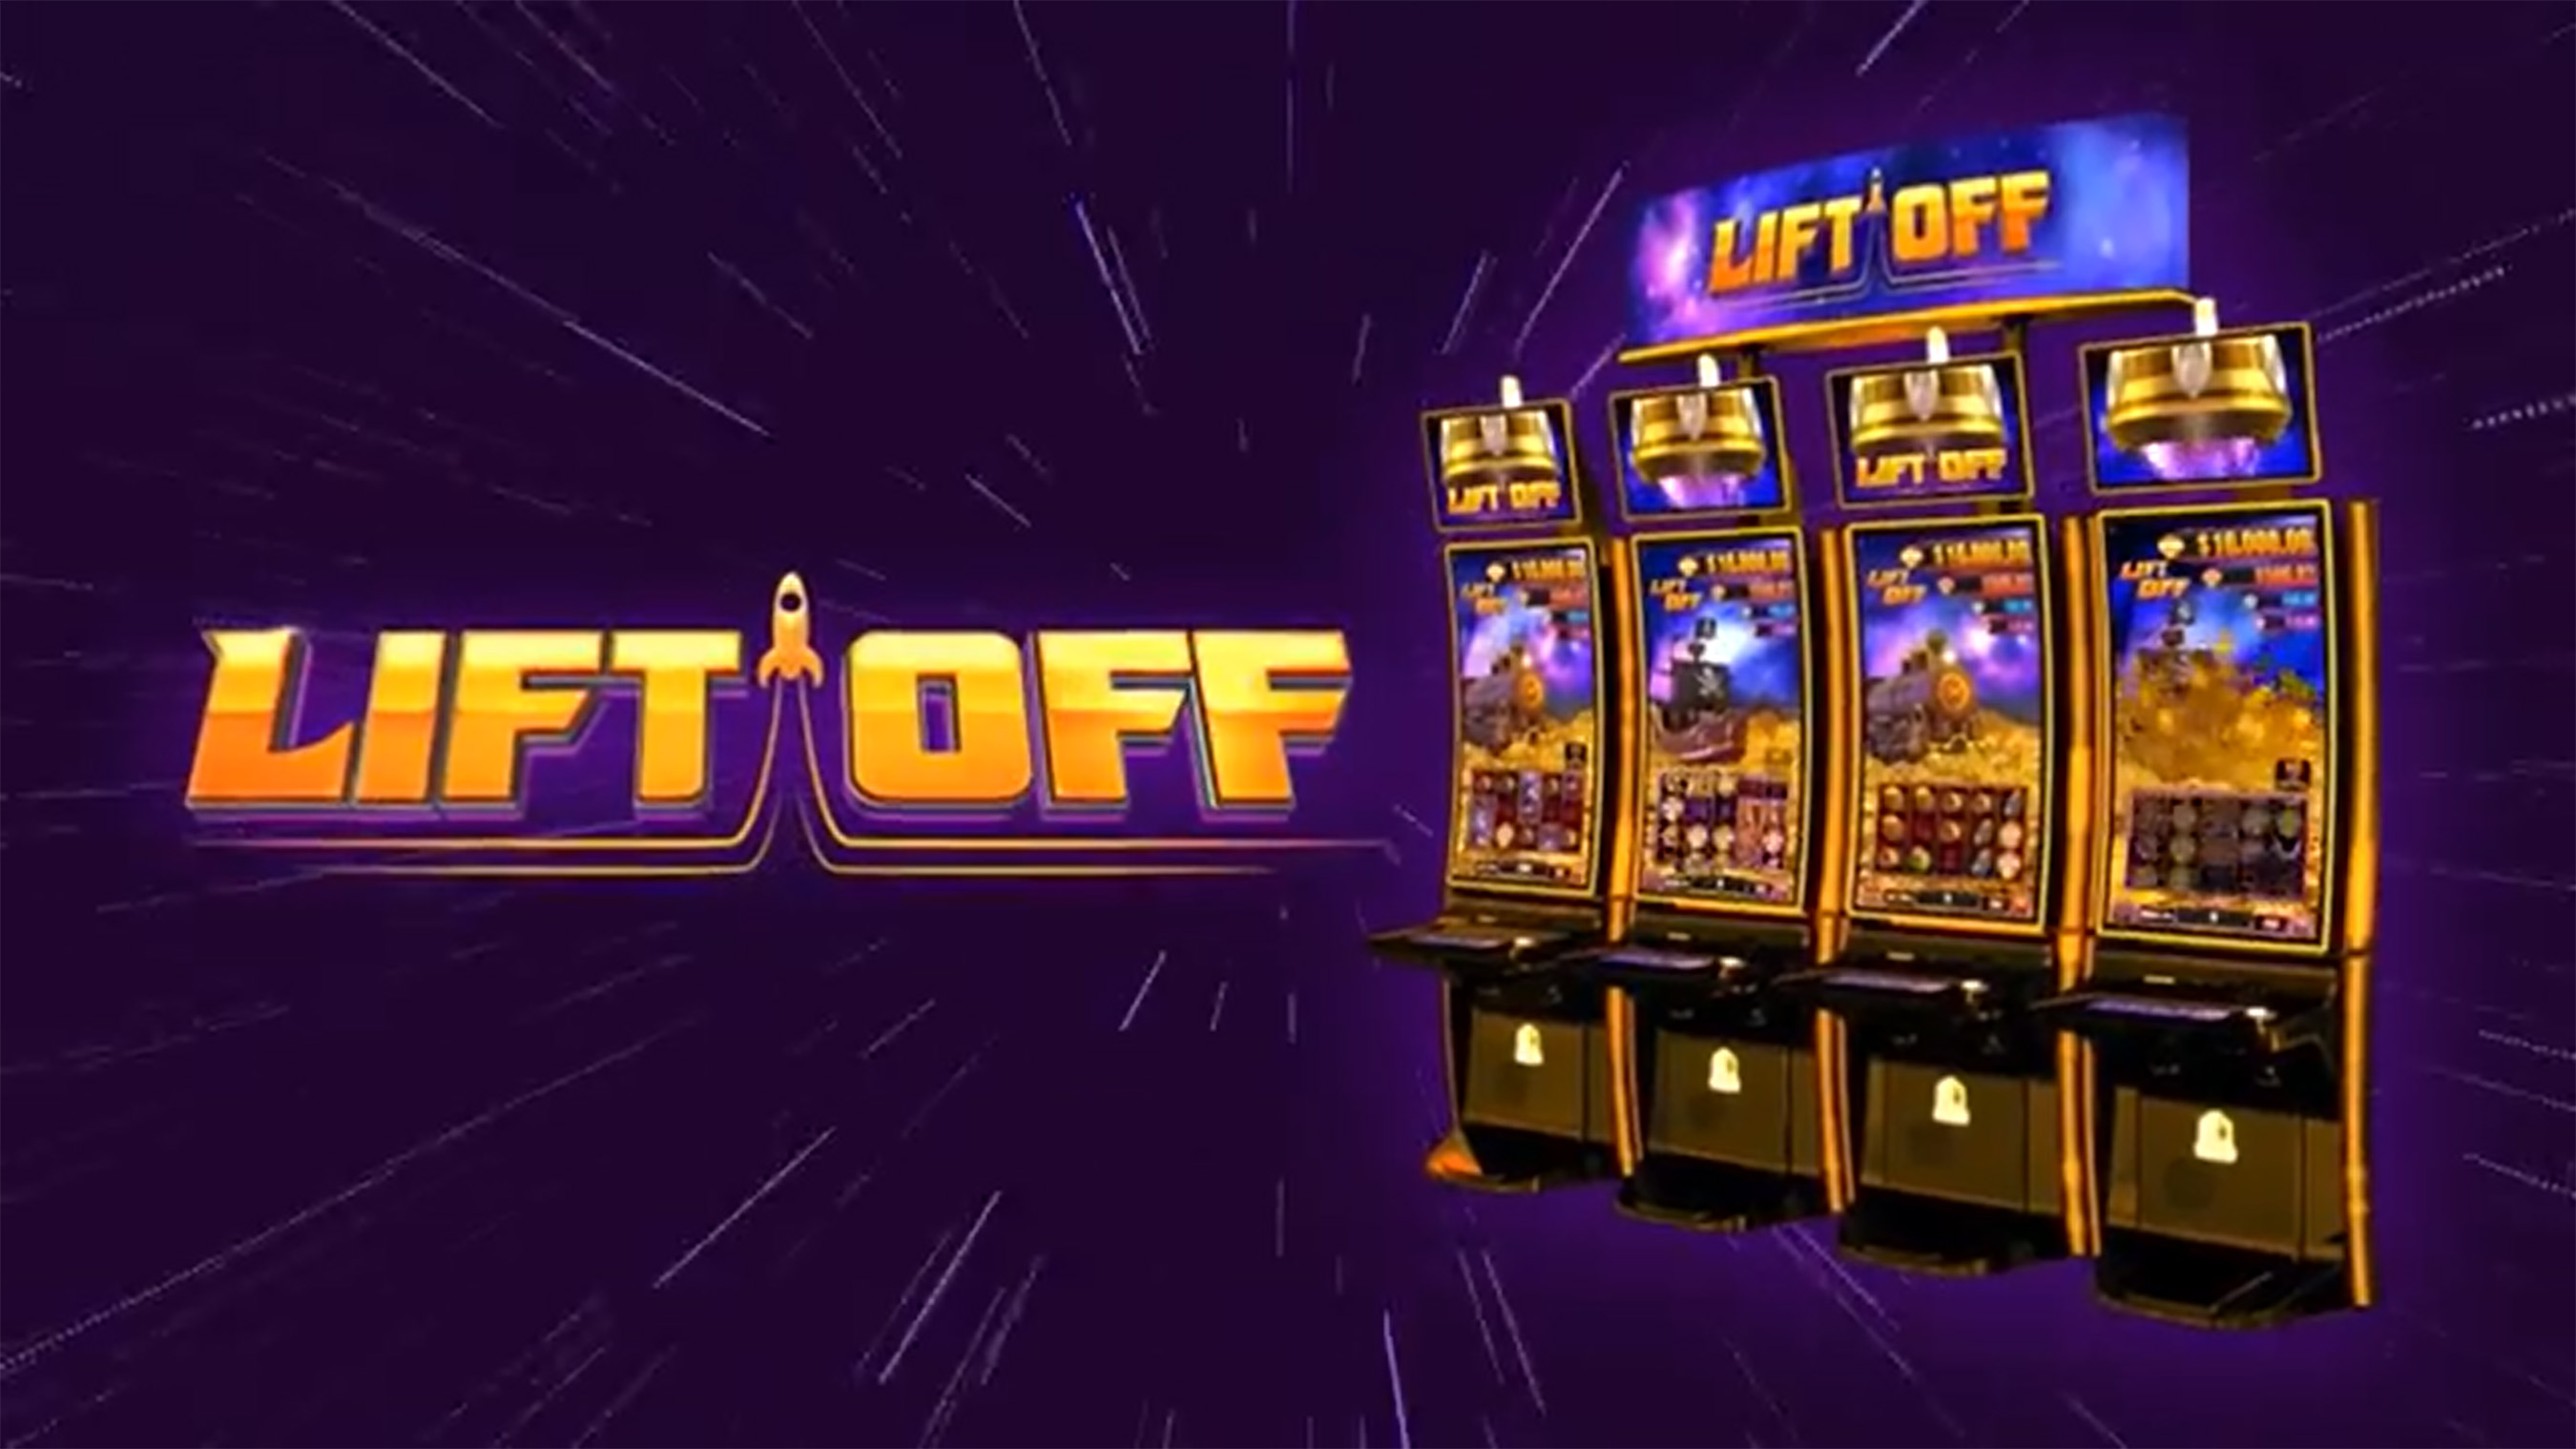 Play Video: Lift Off Video